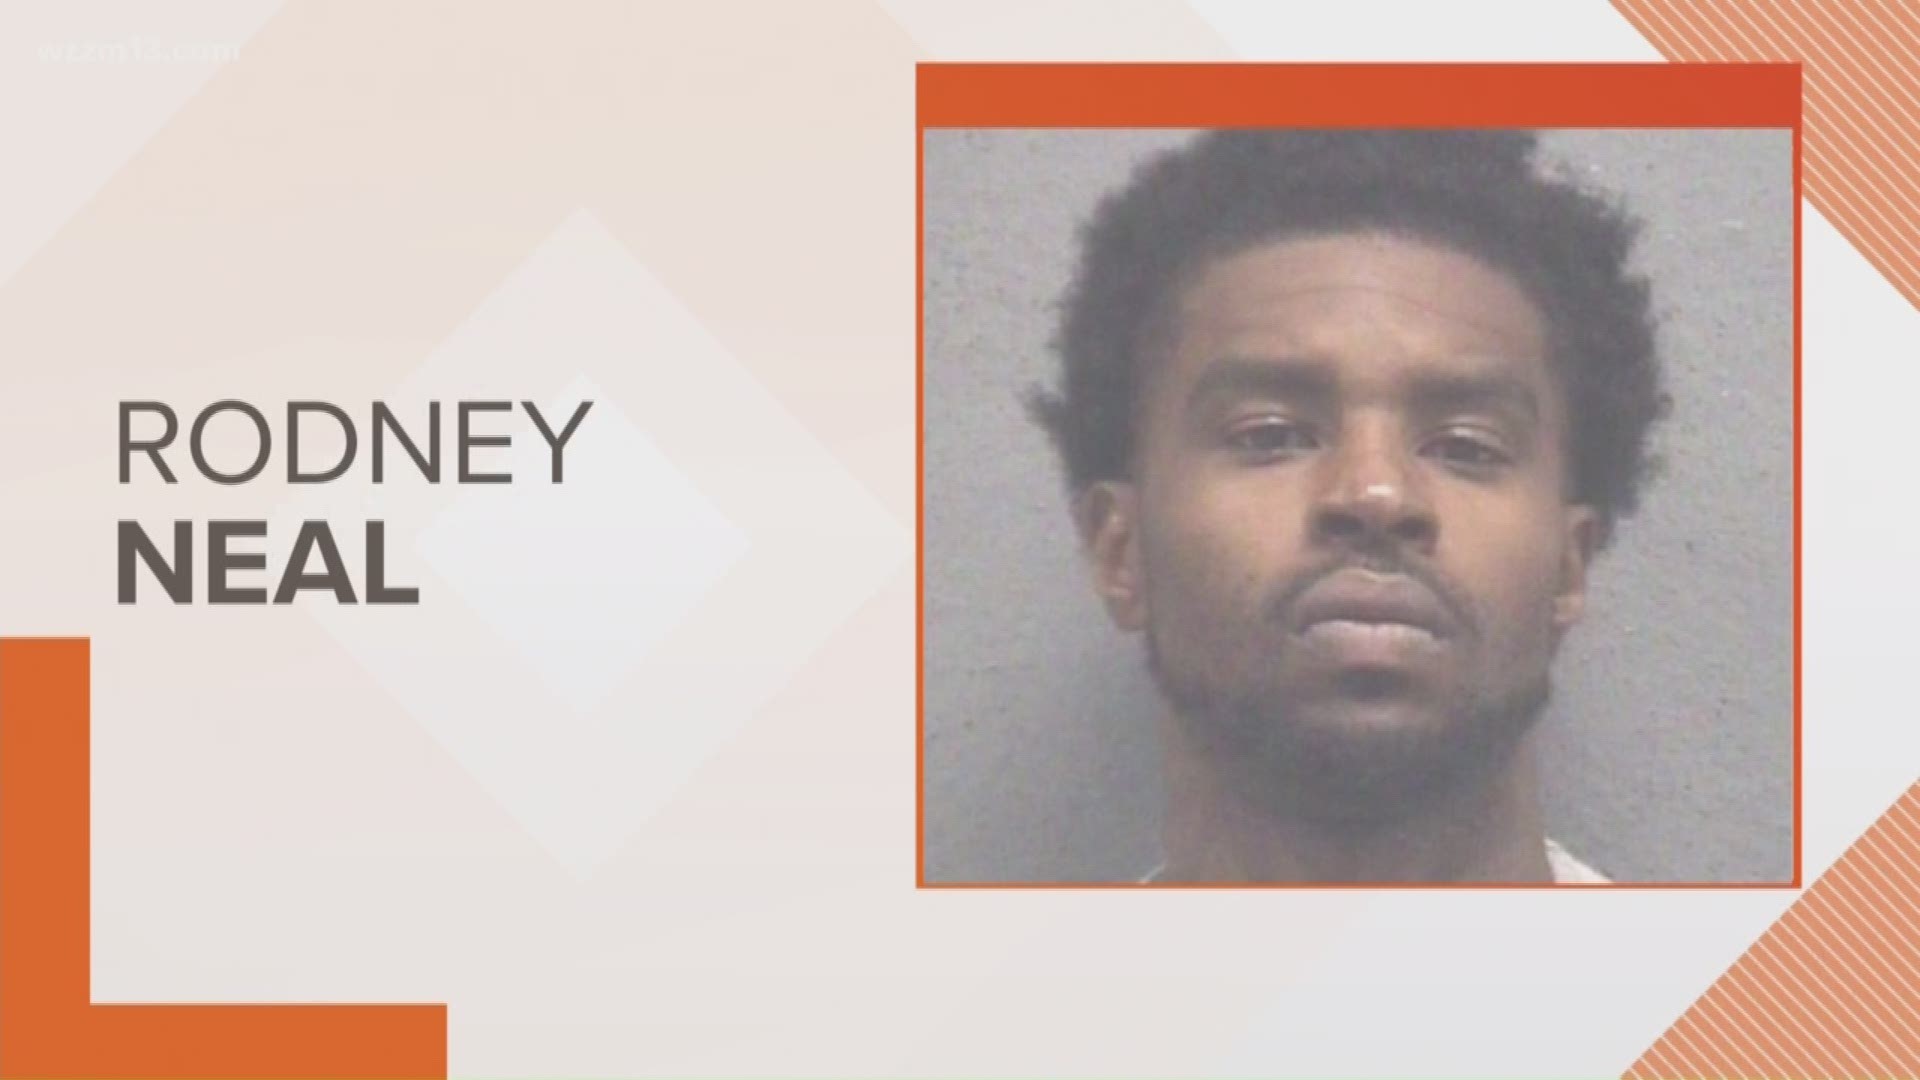 Police arrested Rodney Neal in connection with the shooting. It happened on 6th Street and authorities found 18-year-old Derek Wade Peterson shot in the head inside a vehicle and was slumped over the driver's seat.